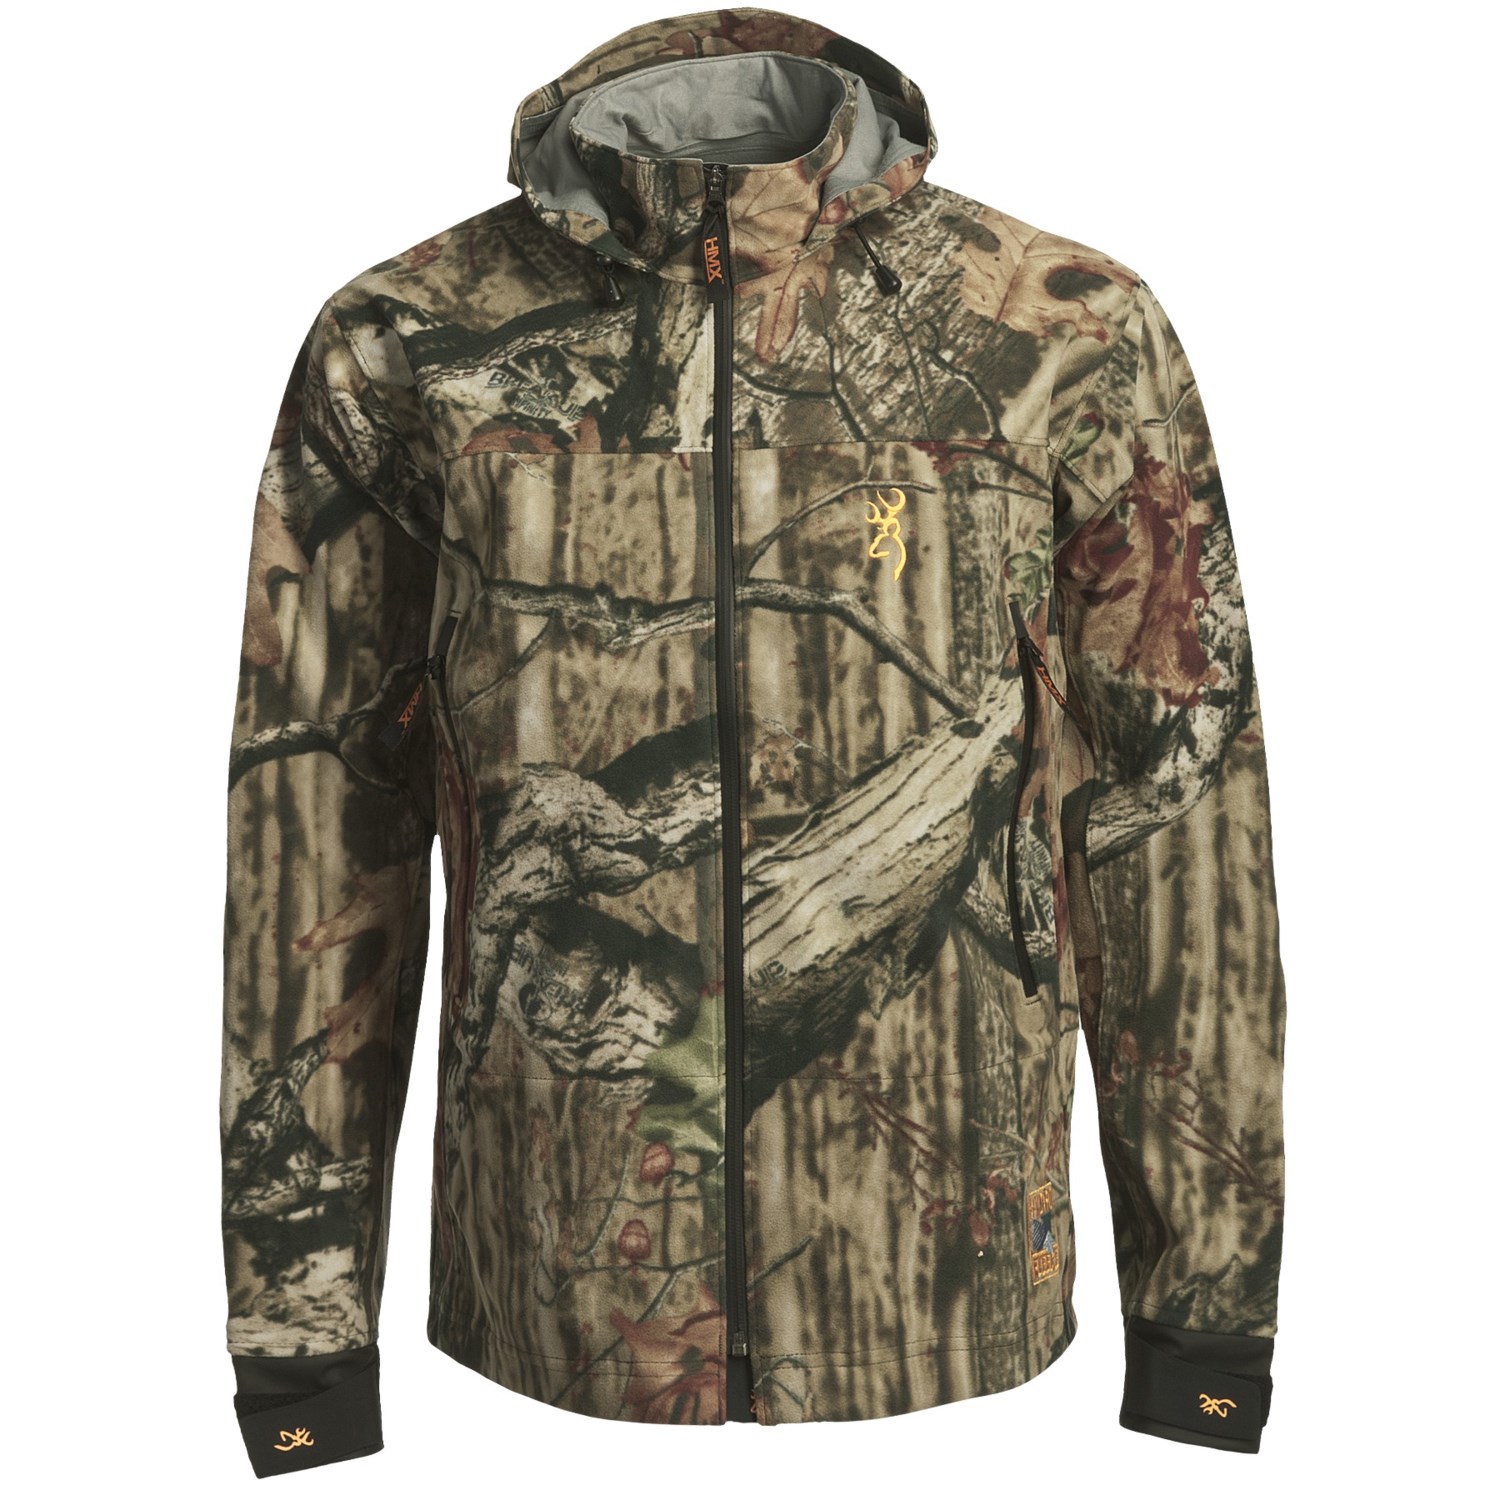 Browning Hydro-Fleece Soft Shell Jacket (For Men) 5481F - Save 29%